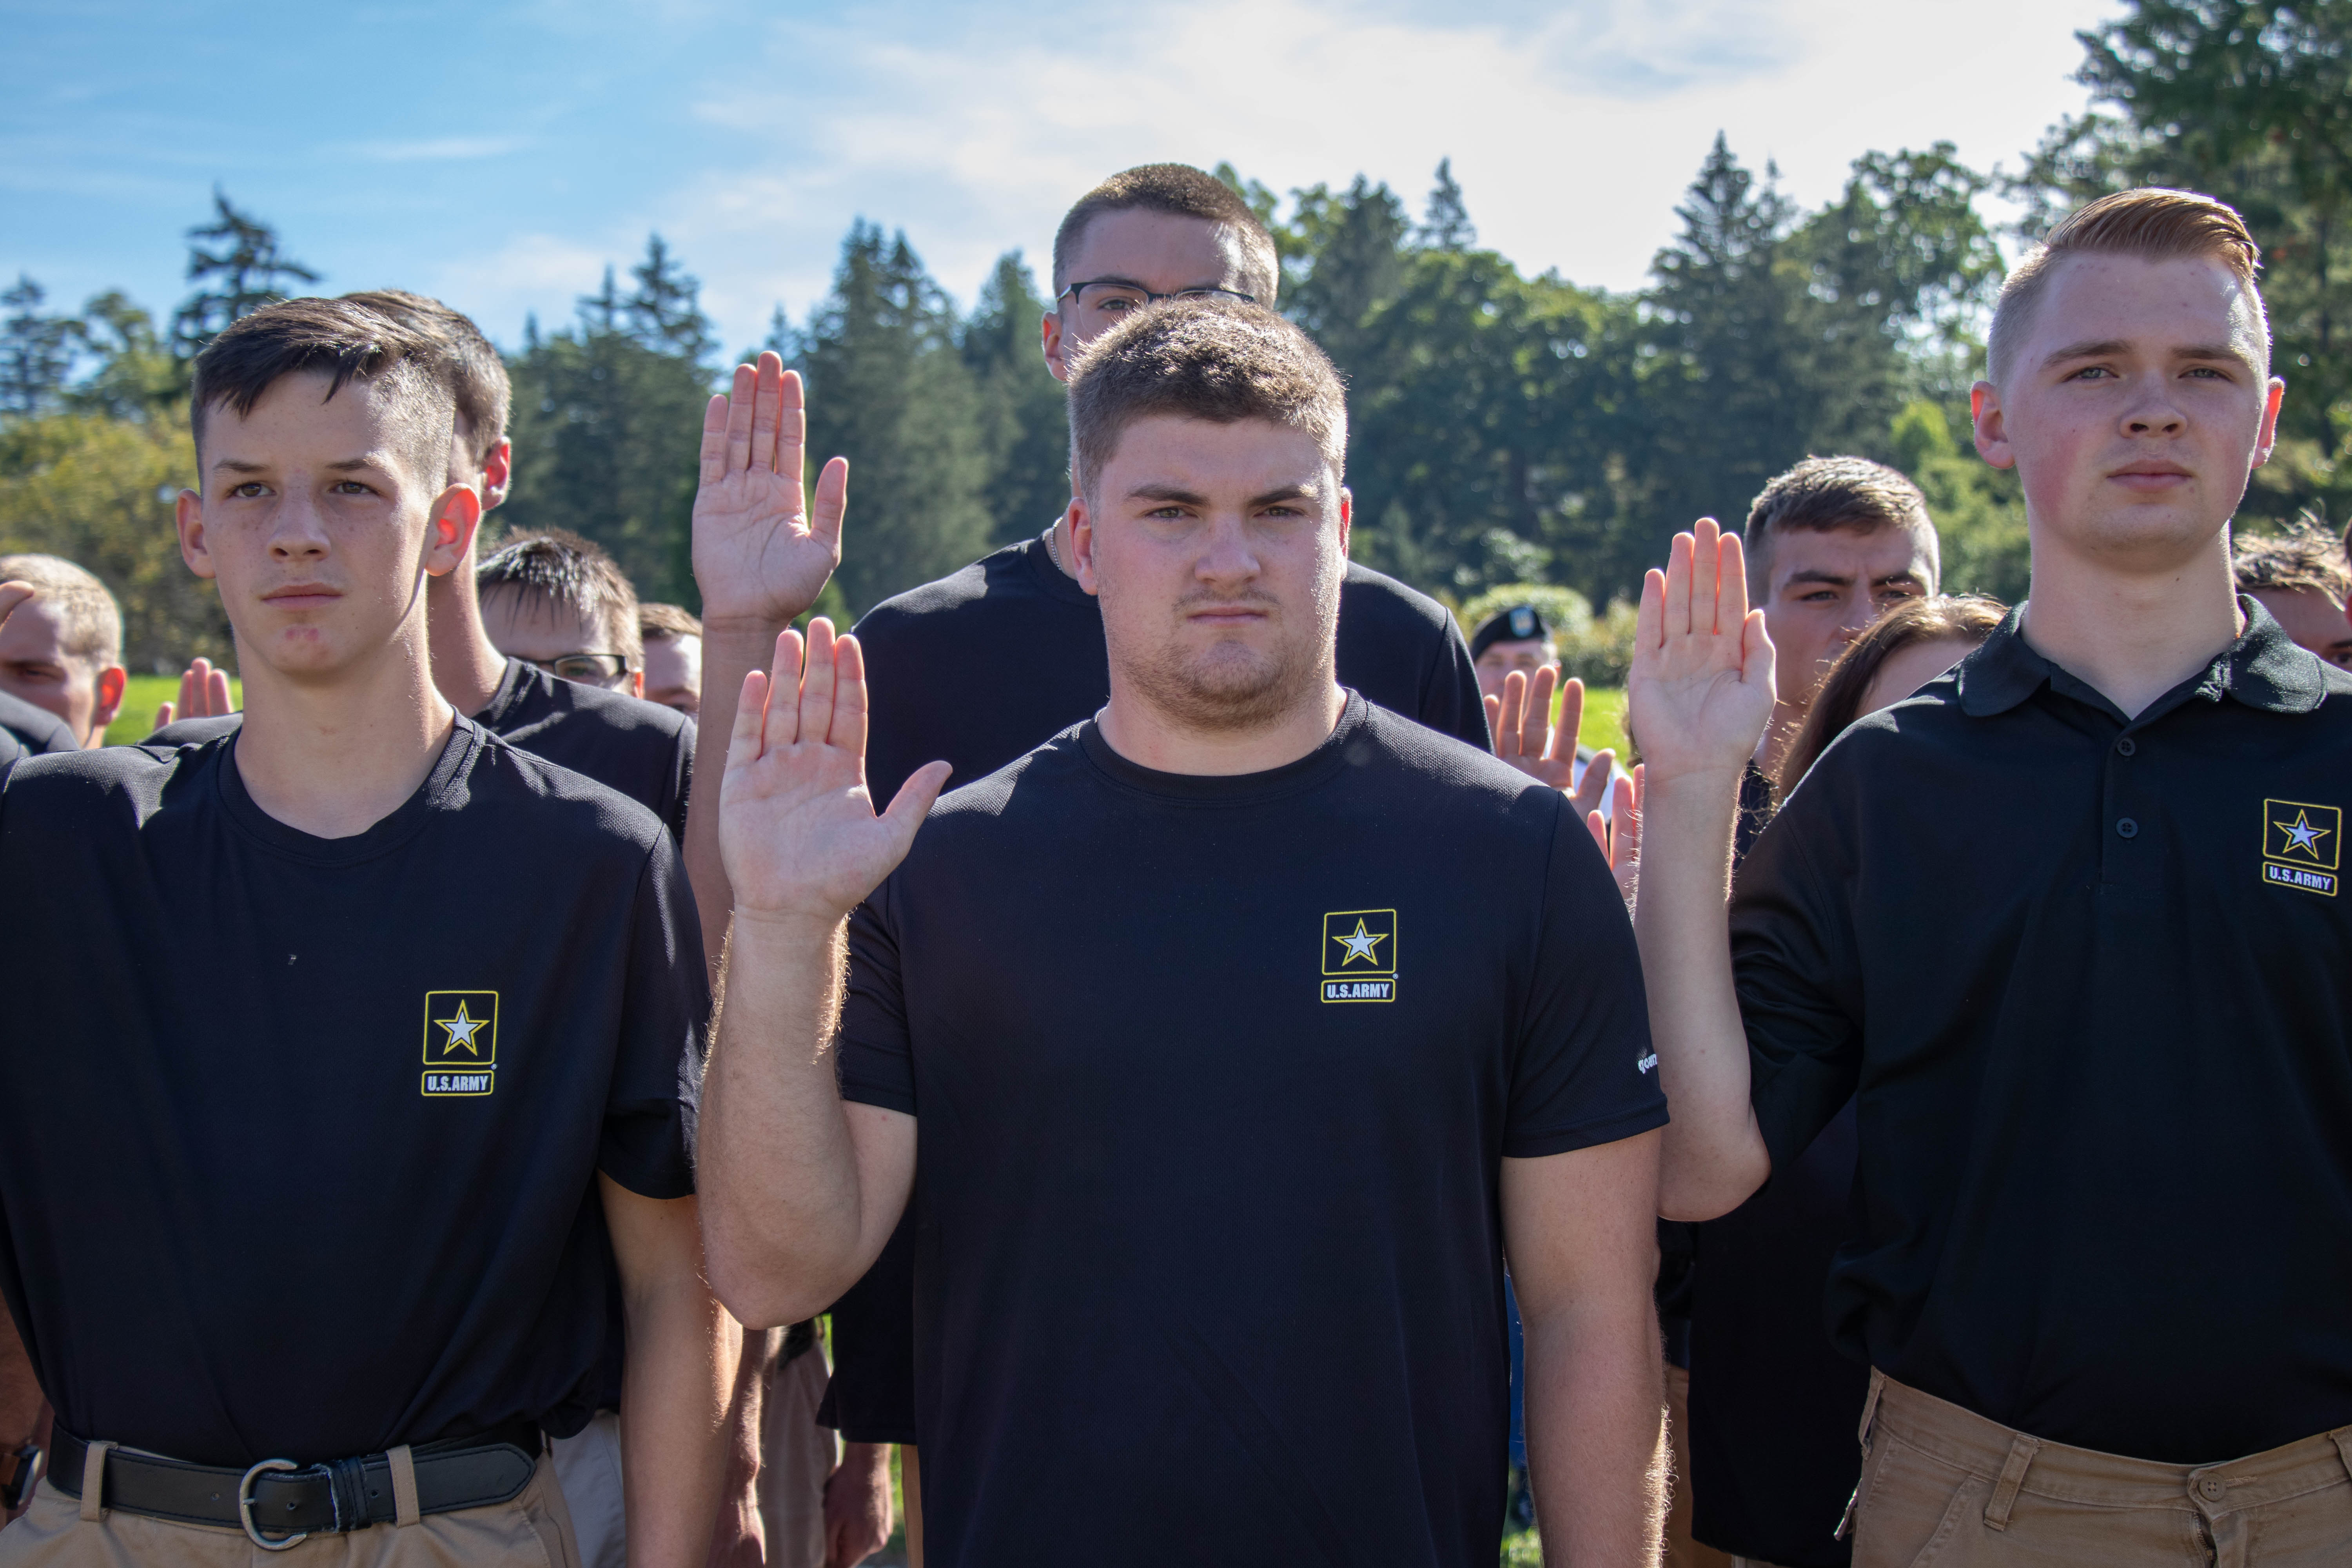 Future Soldiers start Army career with a hole-in-one >U.S. ARMY RECRUITING COMMAND >U.S. Army Recruiting News” style=”clear:both; float:right; padding:10px 0px 10px 10px; border:0px; max-width: 350px;”> One or two shrewd signings with that small funds (FM23 free brokers are your good friend here) might convey this peaking workforce additional up the table and knock rivals Olympiacos off their perch. Week 11 is here and with it comes one other essential alternative for the top groups to prove they belong in School Football Playoff contention, while these on the outside trying in hope for some chaos to benefit from in the next rankings. Prescott didn’t disappoint his rookie season, earning a spot within the Professional Bowl whereas also main the Cowboys to the playoffs. The slogan was parodied in a skit on the Australian tv series The Late Show in 1993 with “Dickhead Tonight”, the place folks danced whereas singing “I Really feel Like a Dickhead Tonight”. Many individuals initially scoffed at the brand new uniforms, which finally received over their fair share of fans. When you think about travel jobs, the travel industry (pilot, flight attendant) probably jumps to thoughts, but there are additionally many not-so-apparent career options for individuals who like to get around. Blame it on the large-cash pressure, however the poor quarterback’s profession was doomed from the start. Liverpool’s Javier Mascherano was pink-carded from the sport in Liverpool’s 2-zero victory over Manchester United on the 25th of October, 2009. From 2007 to 2010, the Argentinian midfielder performed for Liverpool, eventually leaving for Barcelona, where he performed the longest stretch of his professional career.</p>
<p><span style=